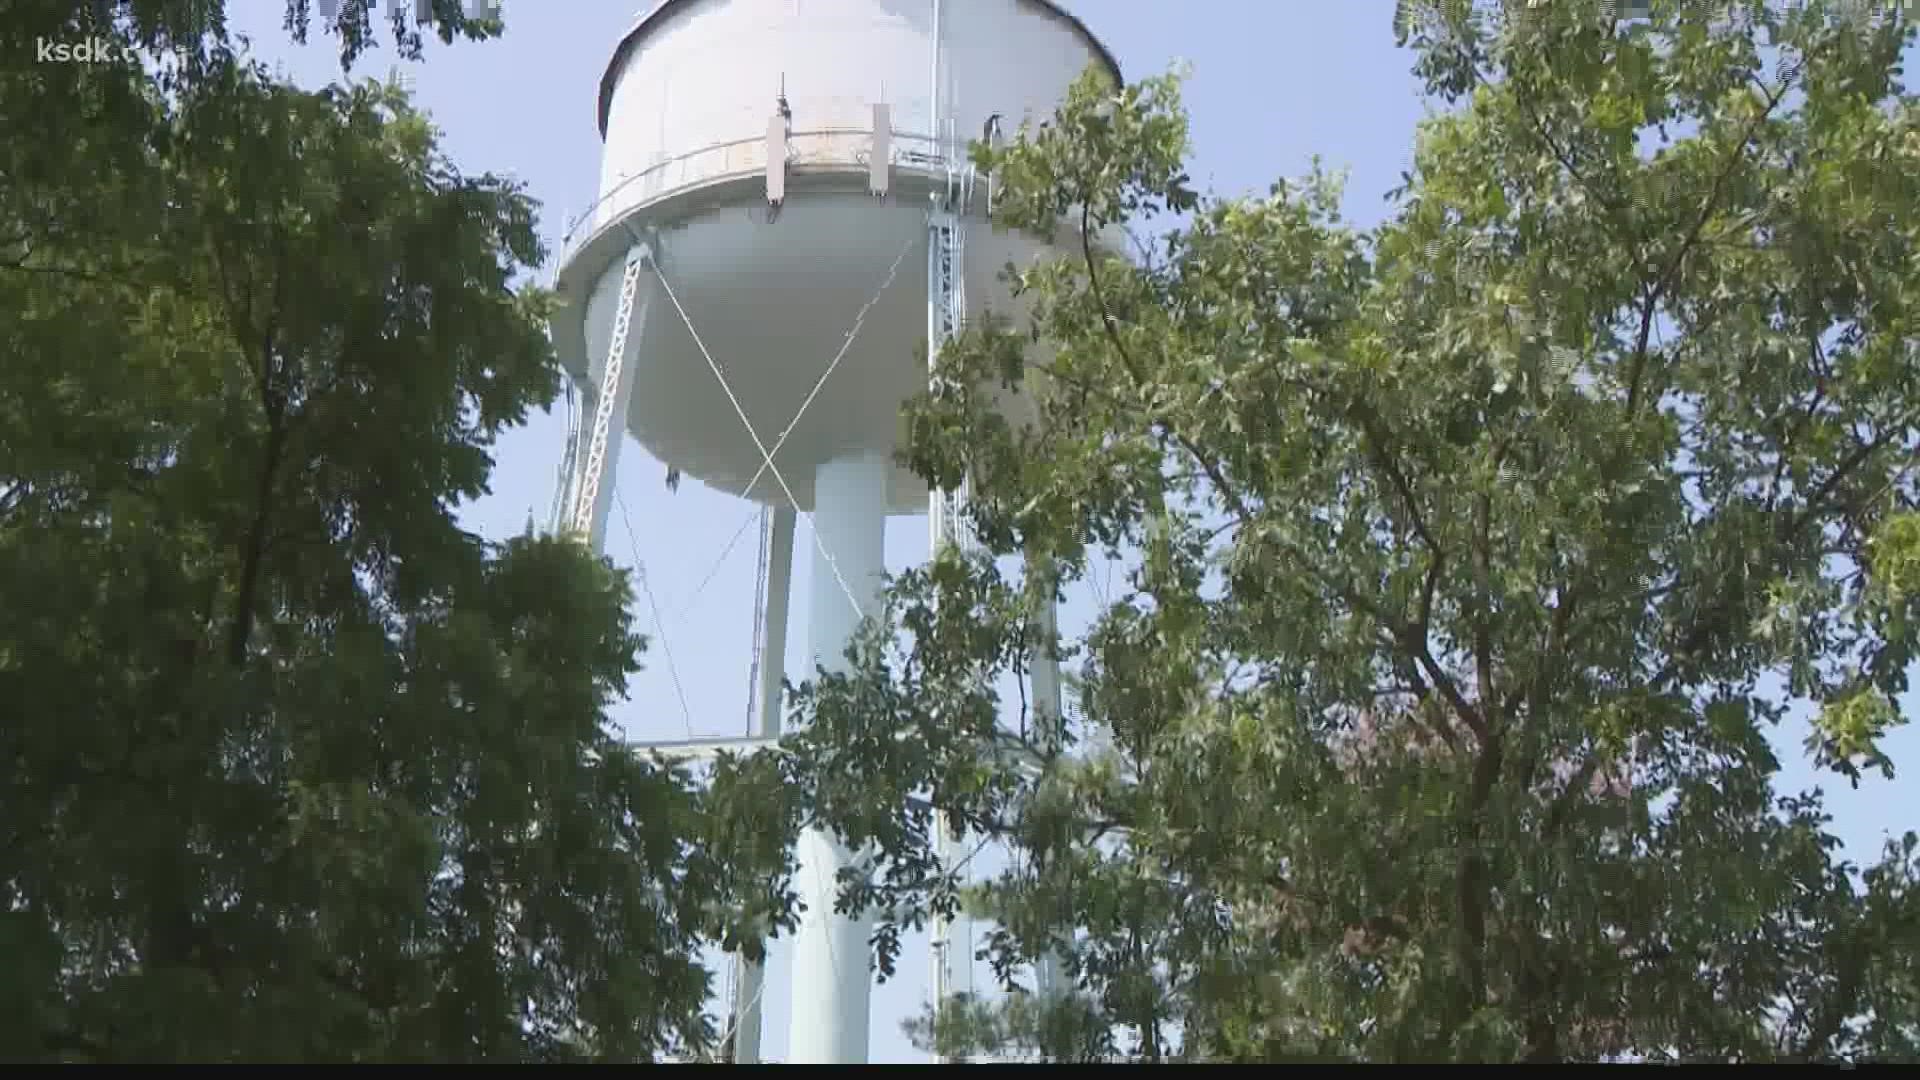 The proposed water tower could benefit many in  South County, but some Sunset Hill residents say it would come at a great cost to a select few.